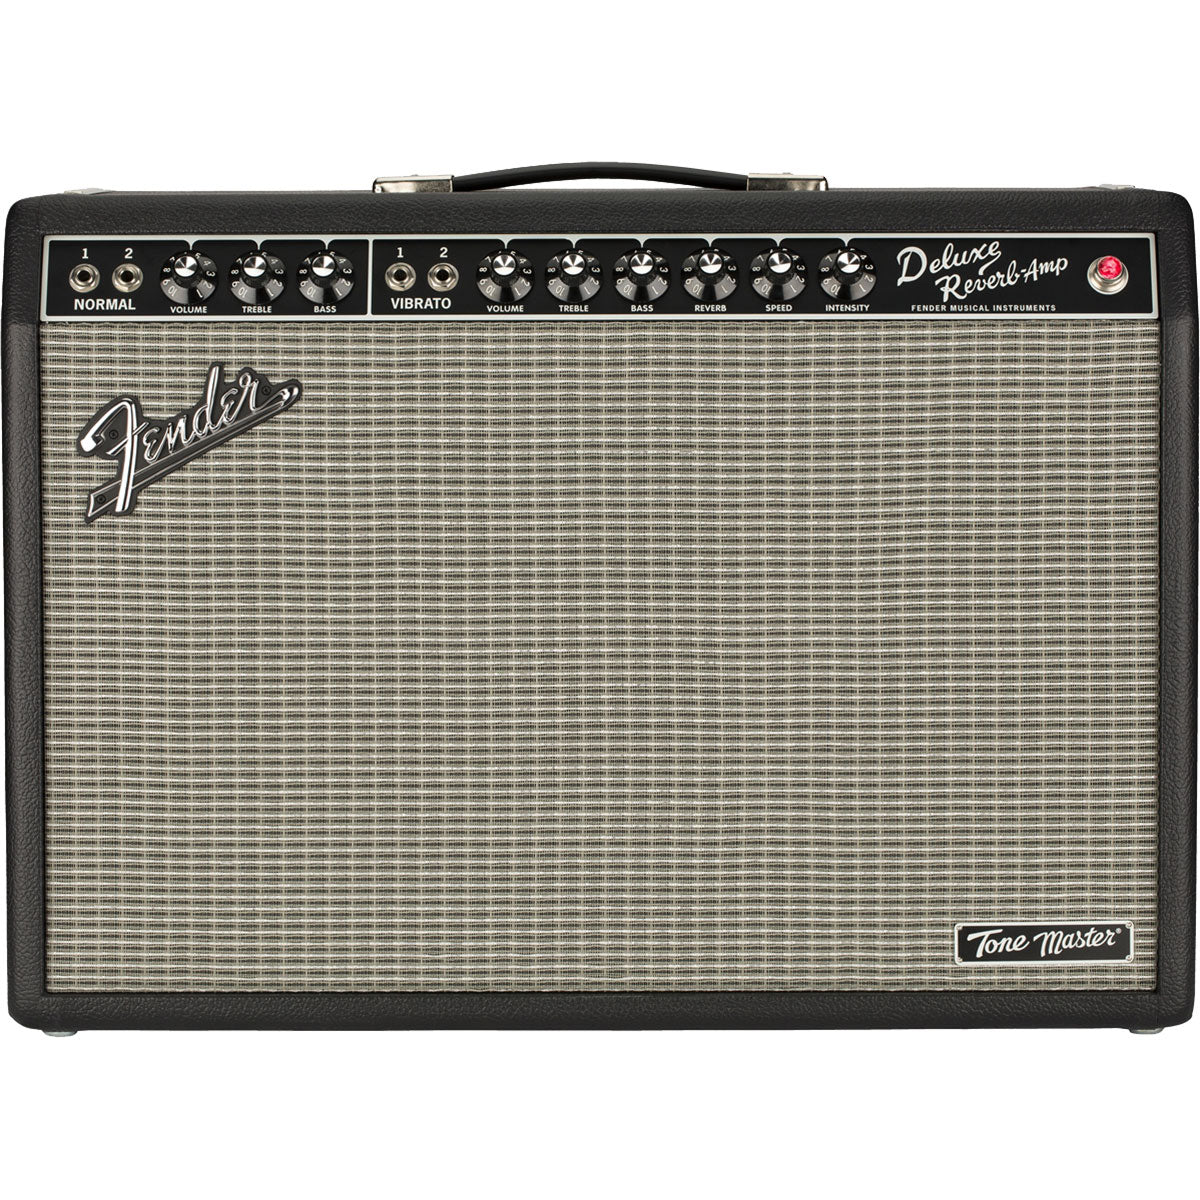 Front view of Fender Tone Master Deluxe Reverb Guitar Amplifier